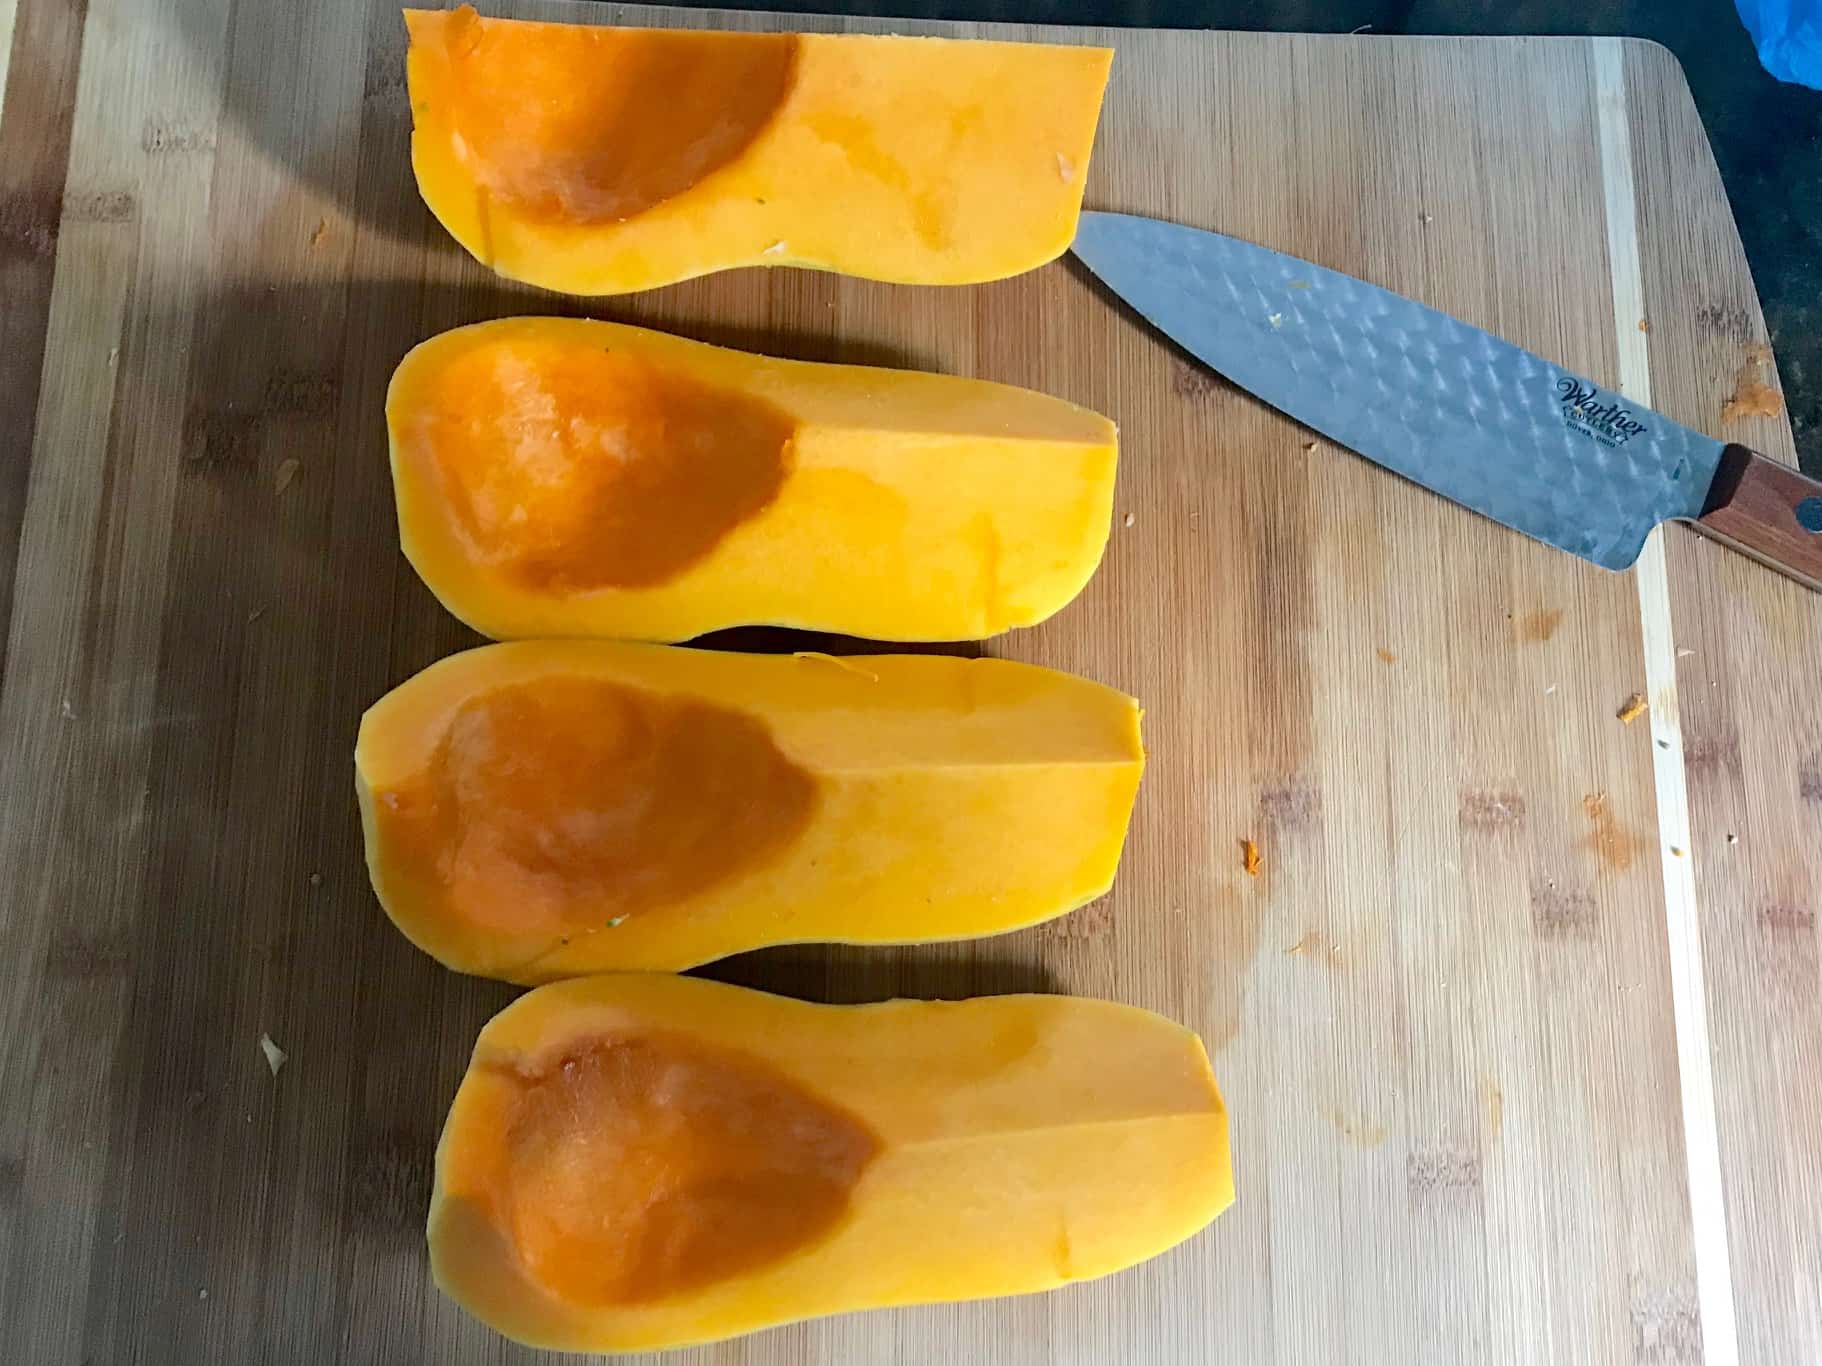 Butternut squash peeled and cut into fourths